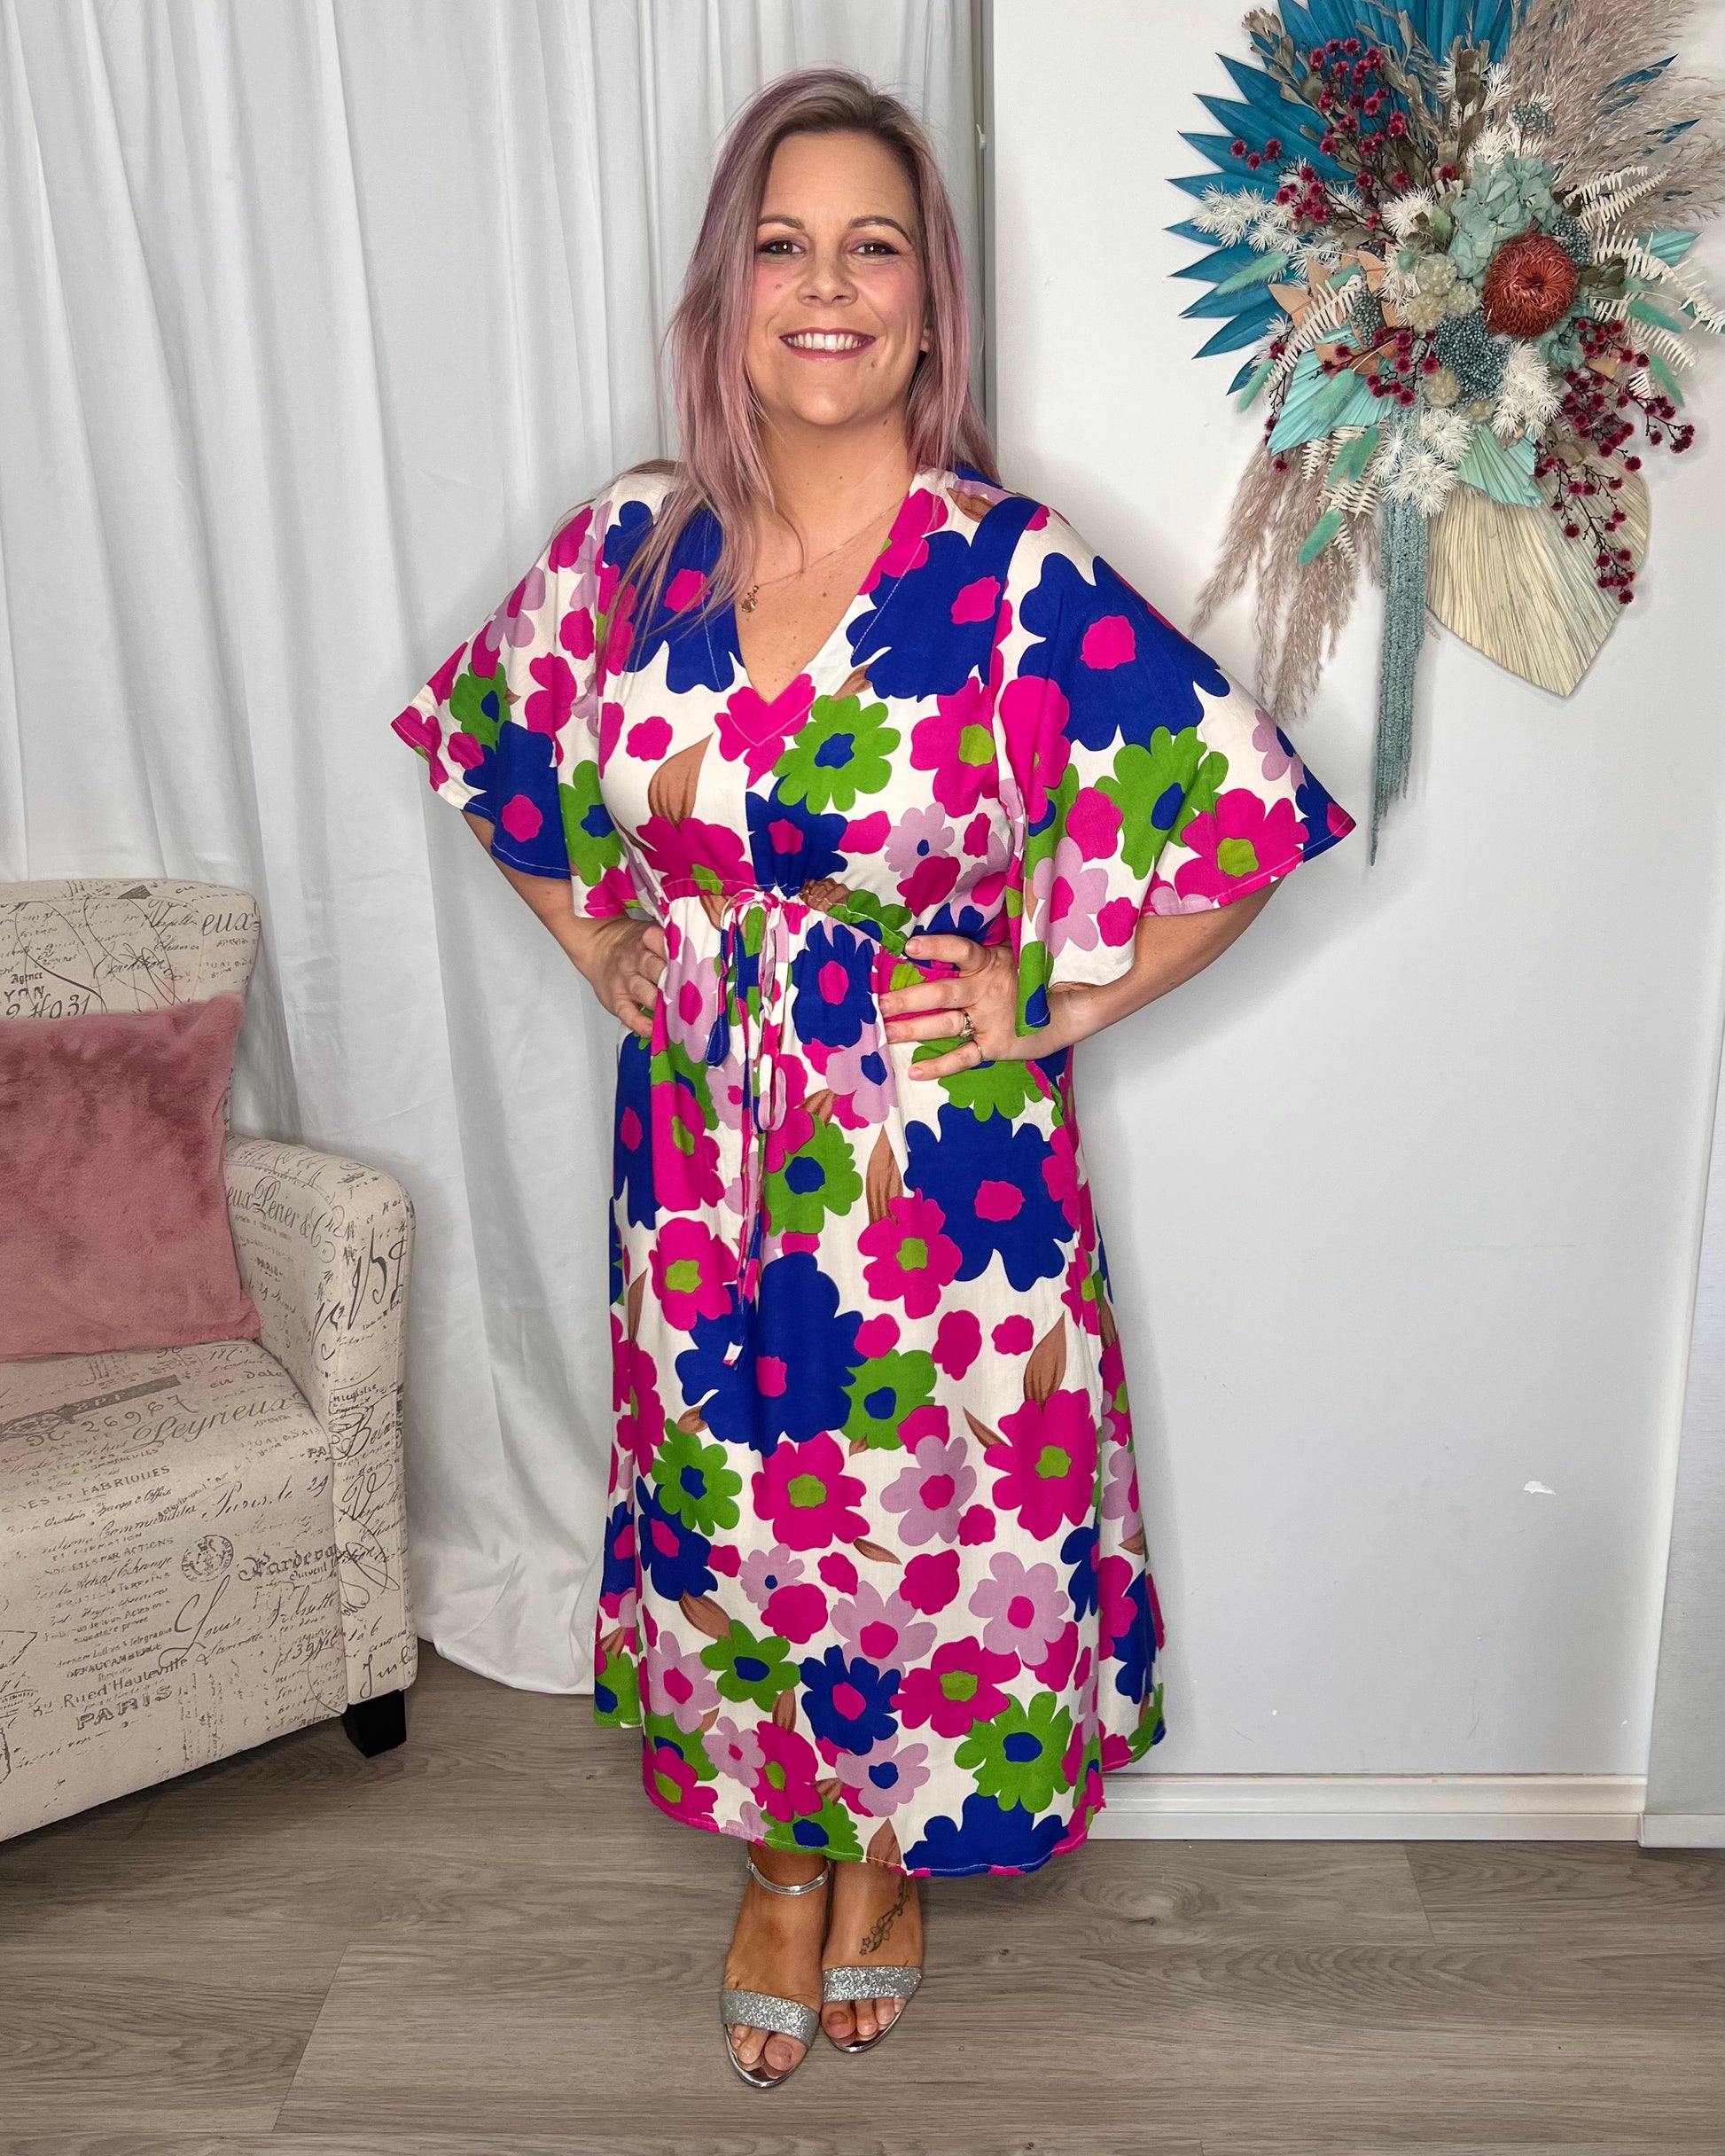 **NEW** Debby Dress: Bring on the summer social season because our new Debby Dress is sensational! Flowing, flattering to the figure and featuring our vibrant new floral print. Style cas - Ciao Bella Dresses 